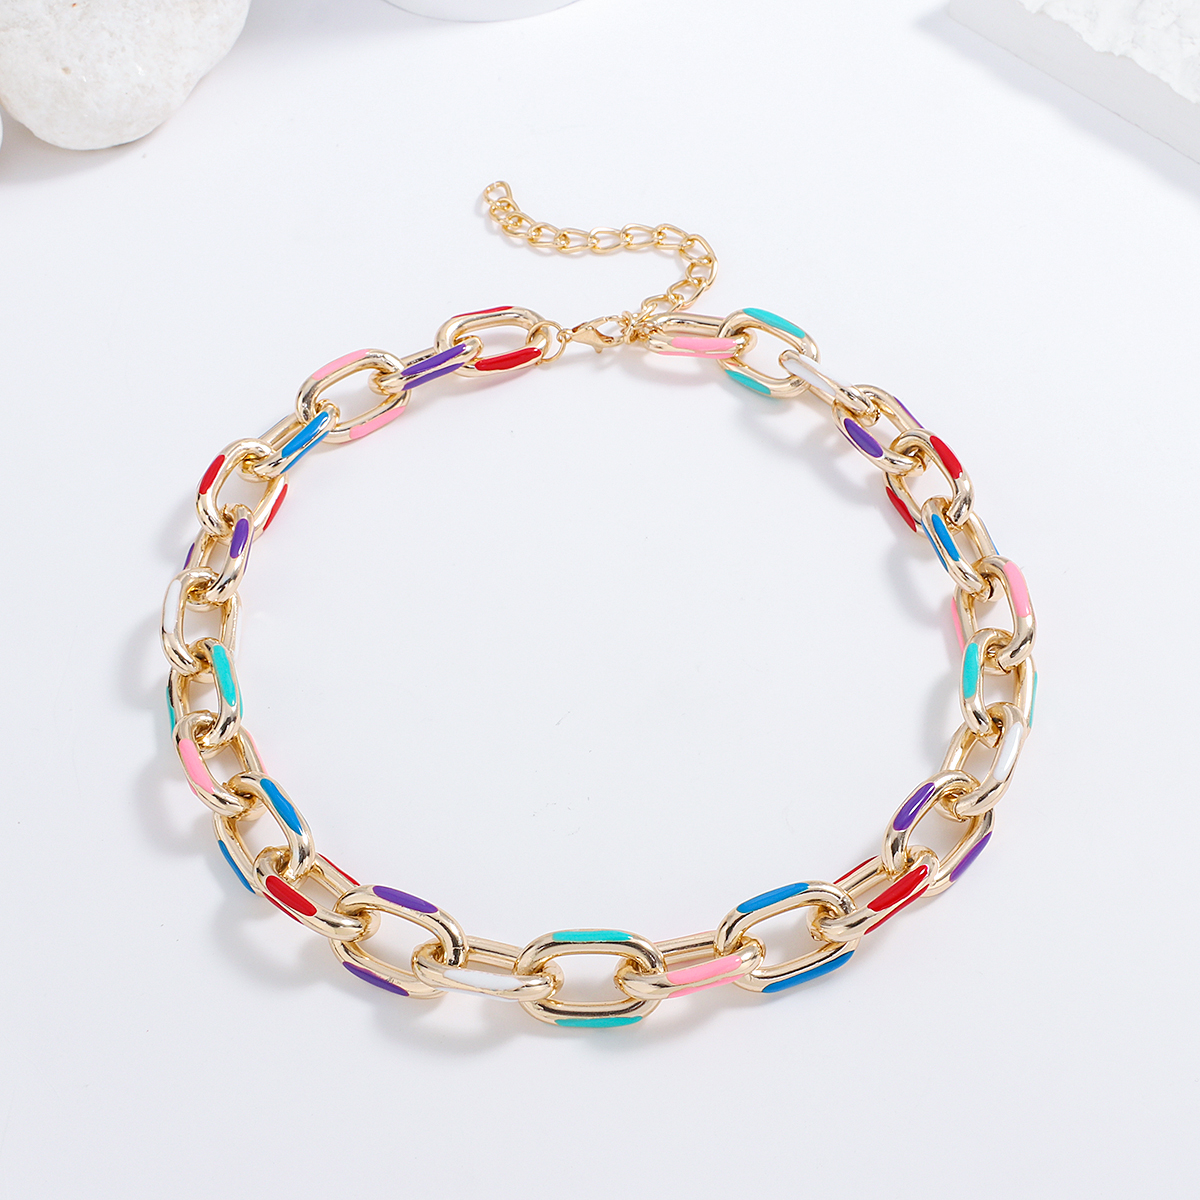 AENSOA Trendy Colorful Enamel Miami Cuban Chain Choker Necklace for Women Gold Color Metal Thick Chain Necklaces Punk Jewelry